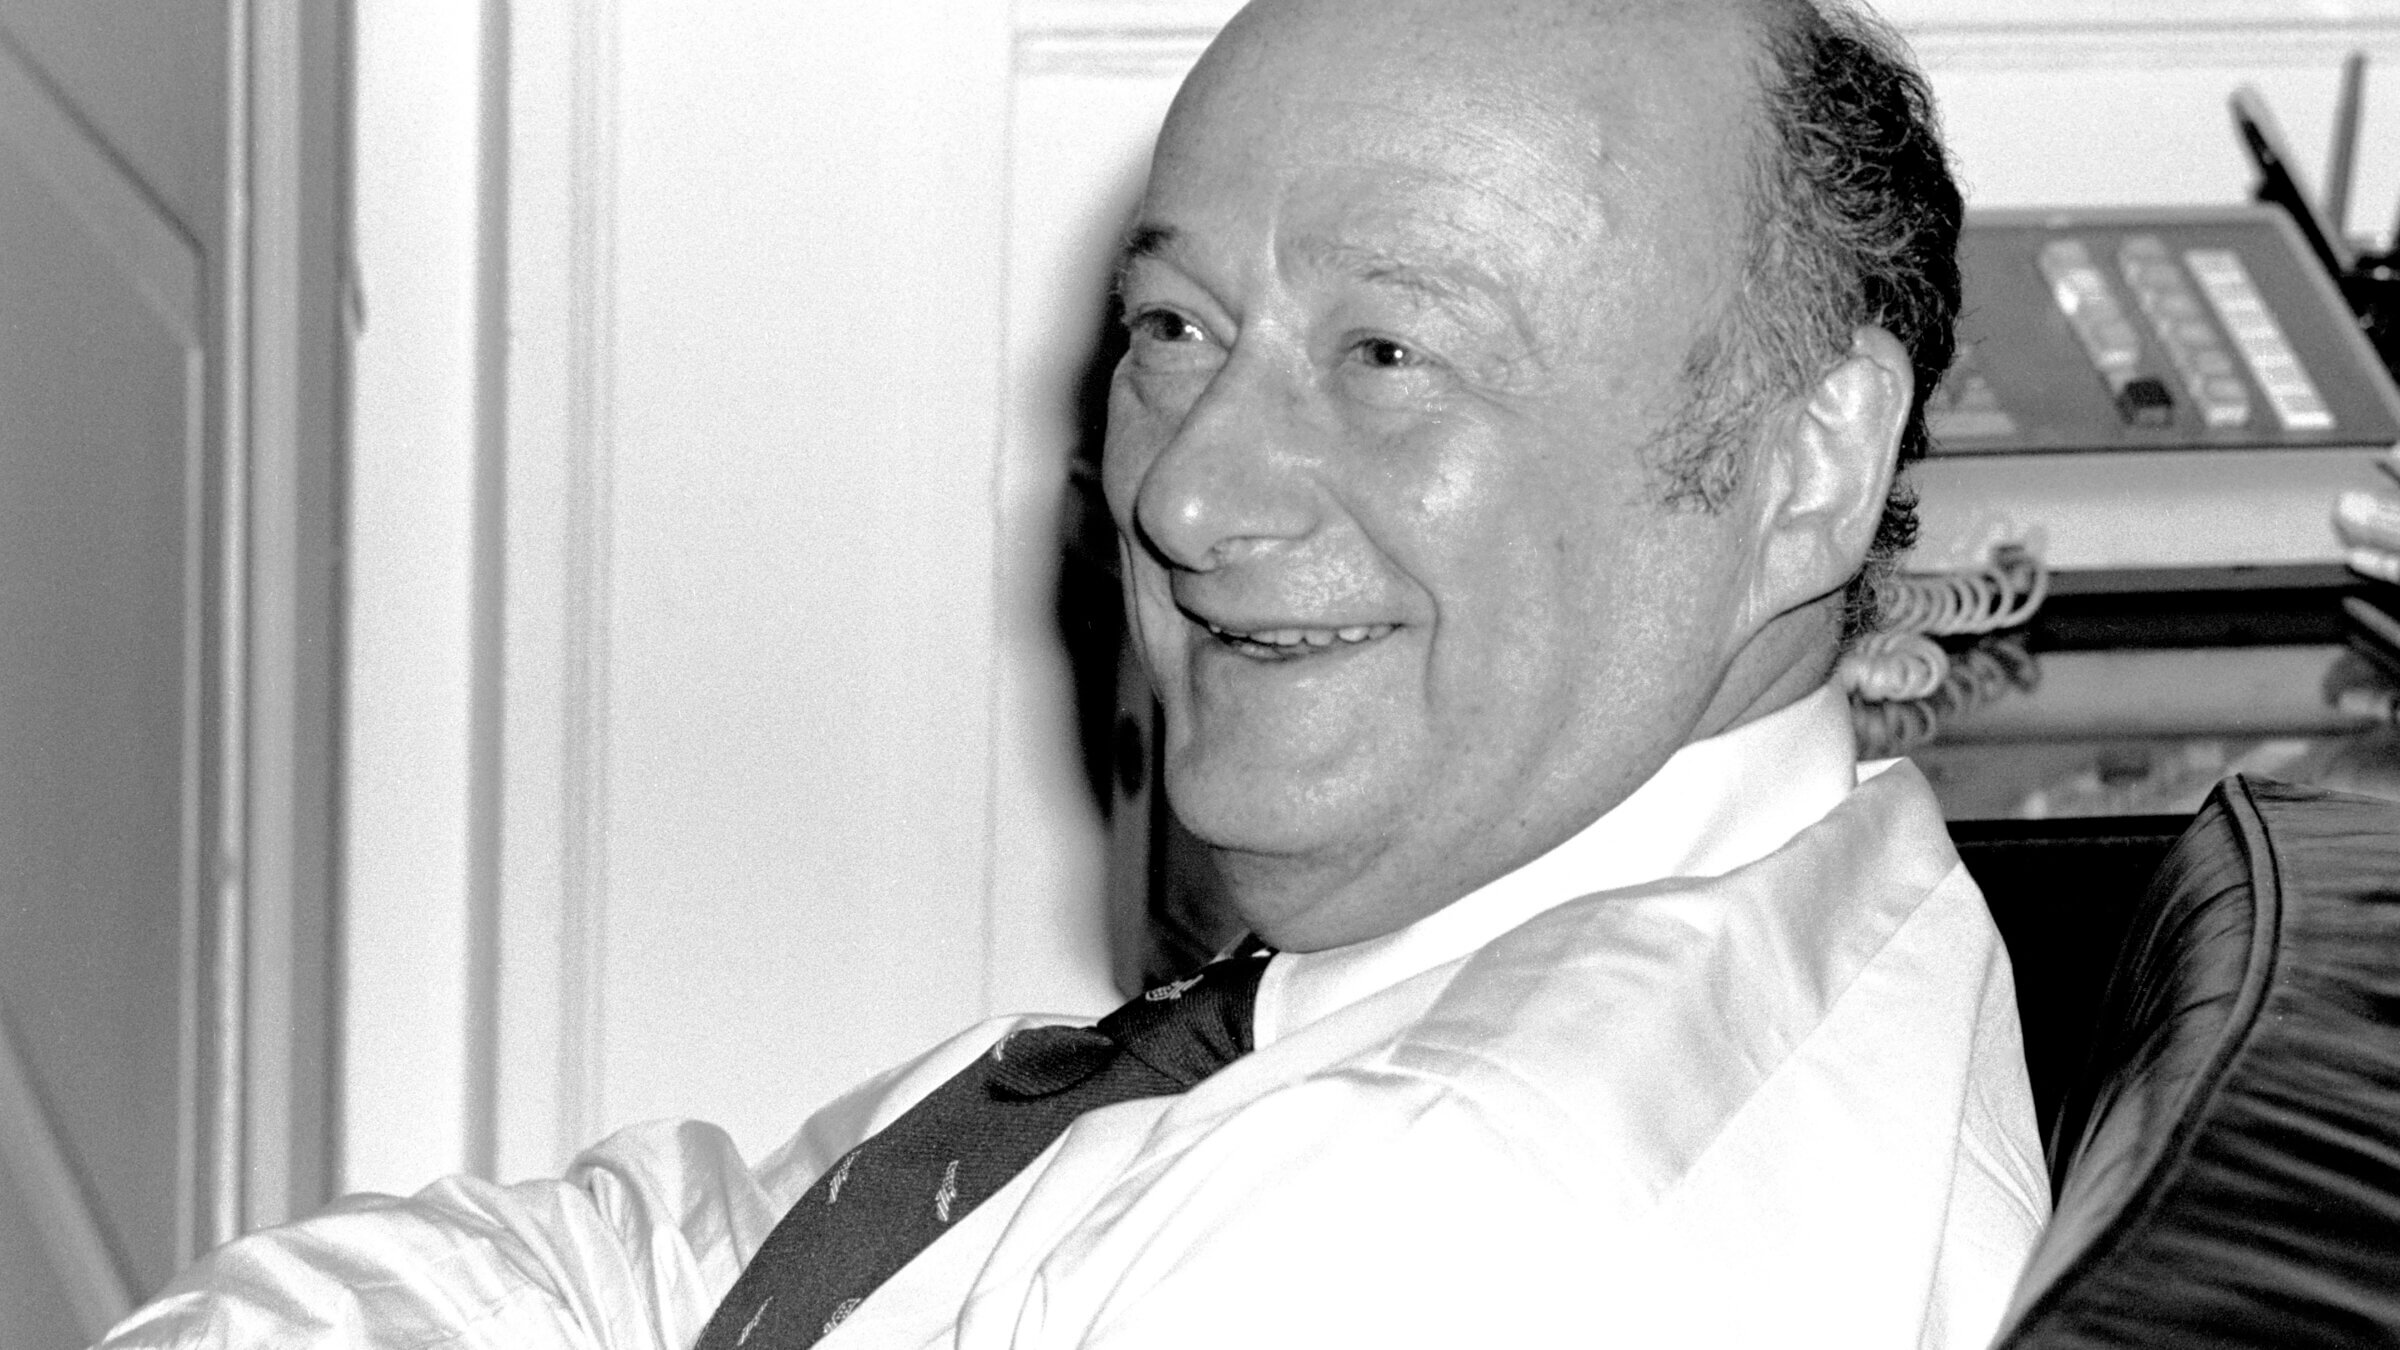 Former NYC Mayor Ed Koch (seen here in 1980) was seen as slow to respond to the AIDS crisis.